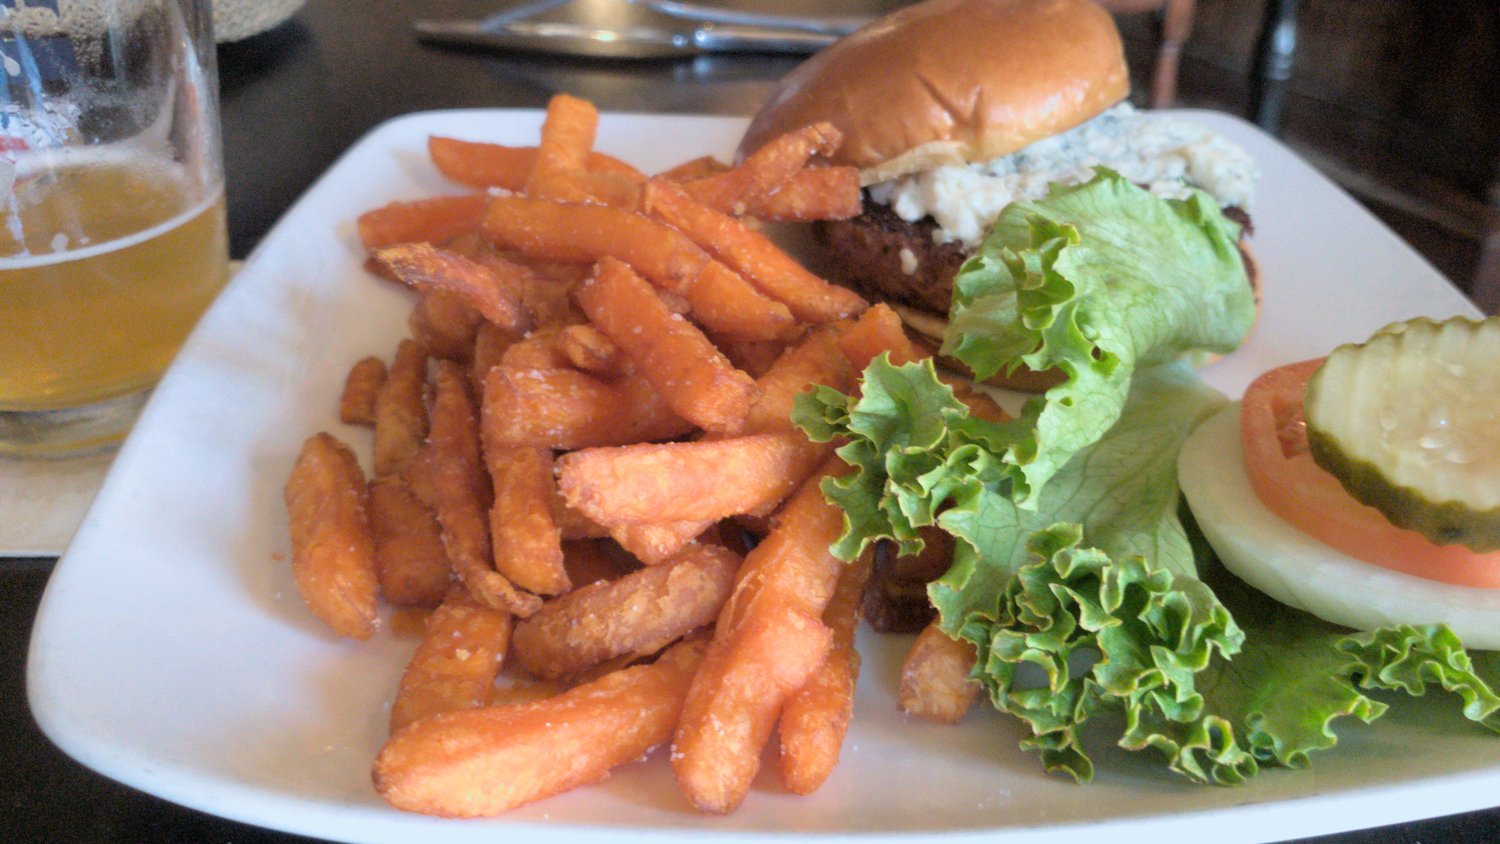 "Beyond Burger" with blue cheese and sweet potato fries.